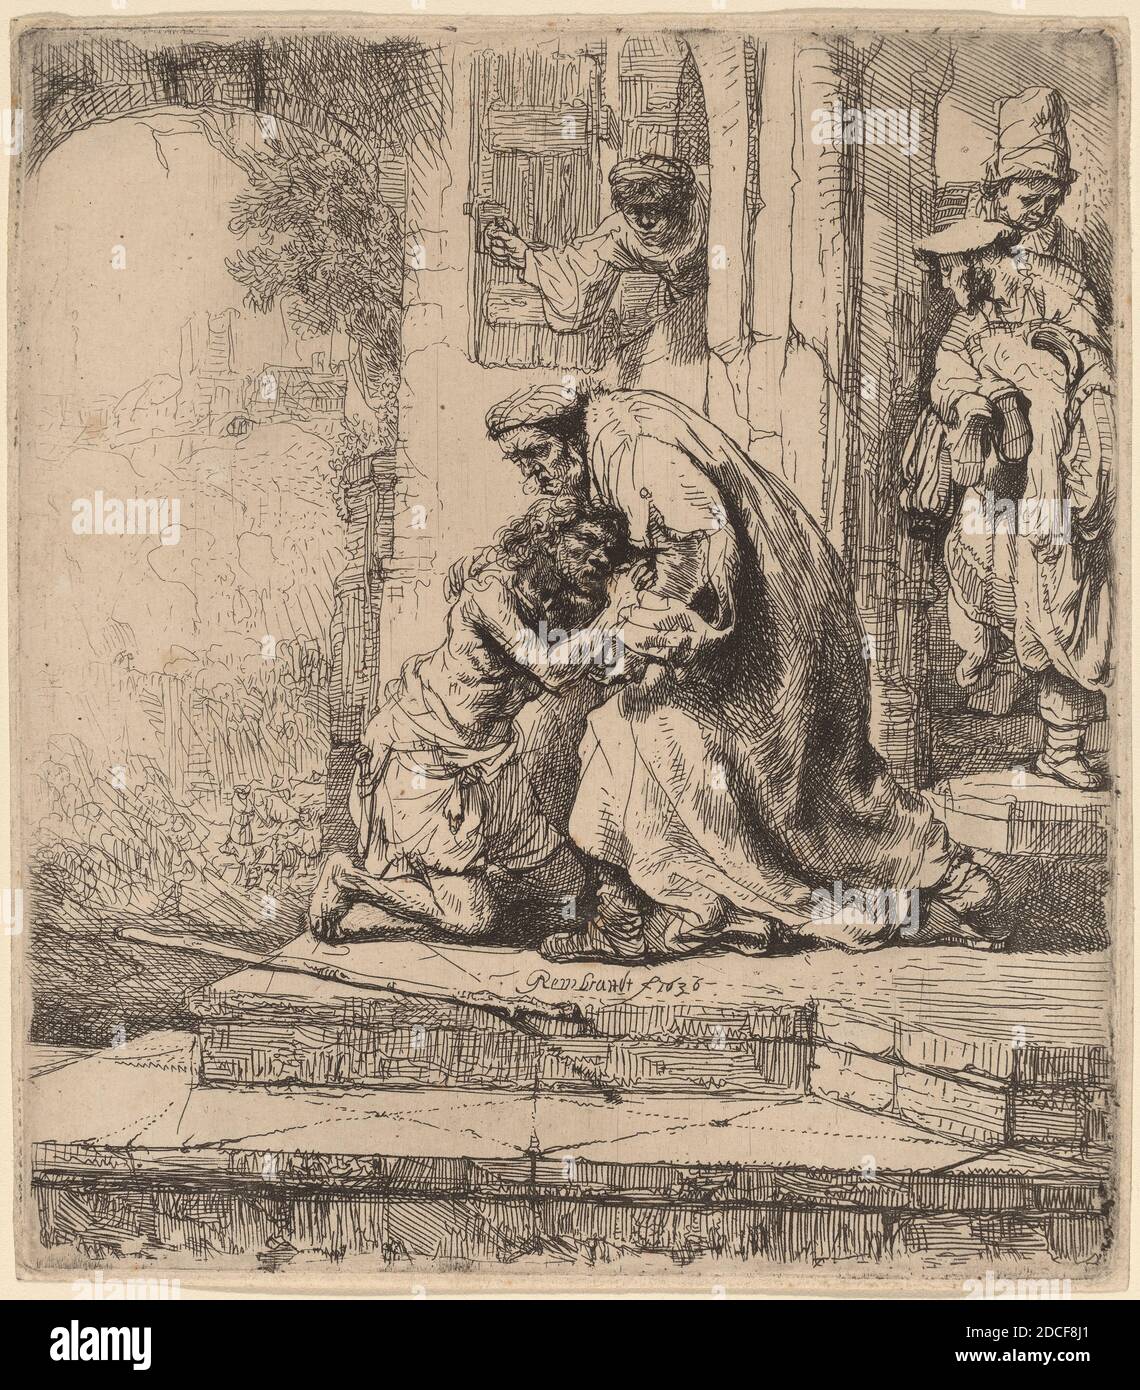 Rembrandt van Rijn, (artist), Dutch, 1606 - 1669, The Return of the Prodigal Son, 1636, etching on laid paper, plate: 15.6 x 13.7 cm (6 1/8 x 5 3/8 in.), sheet: 15.9 x 14 cm (6 1/4 x 5 1/2 in Stock Photo